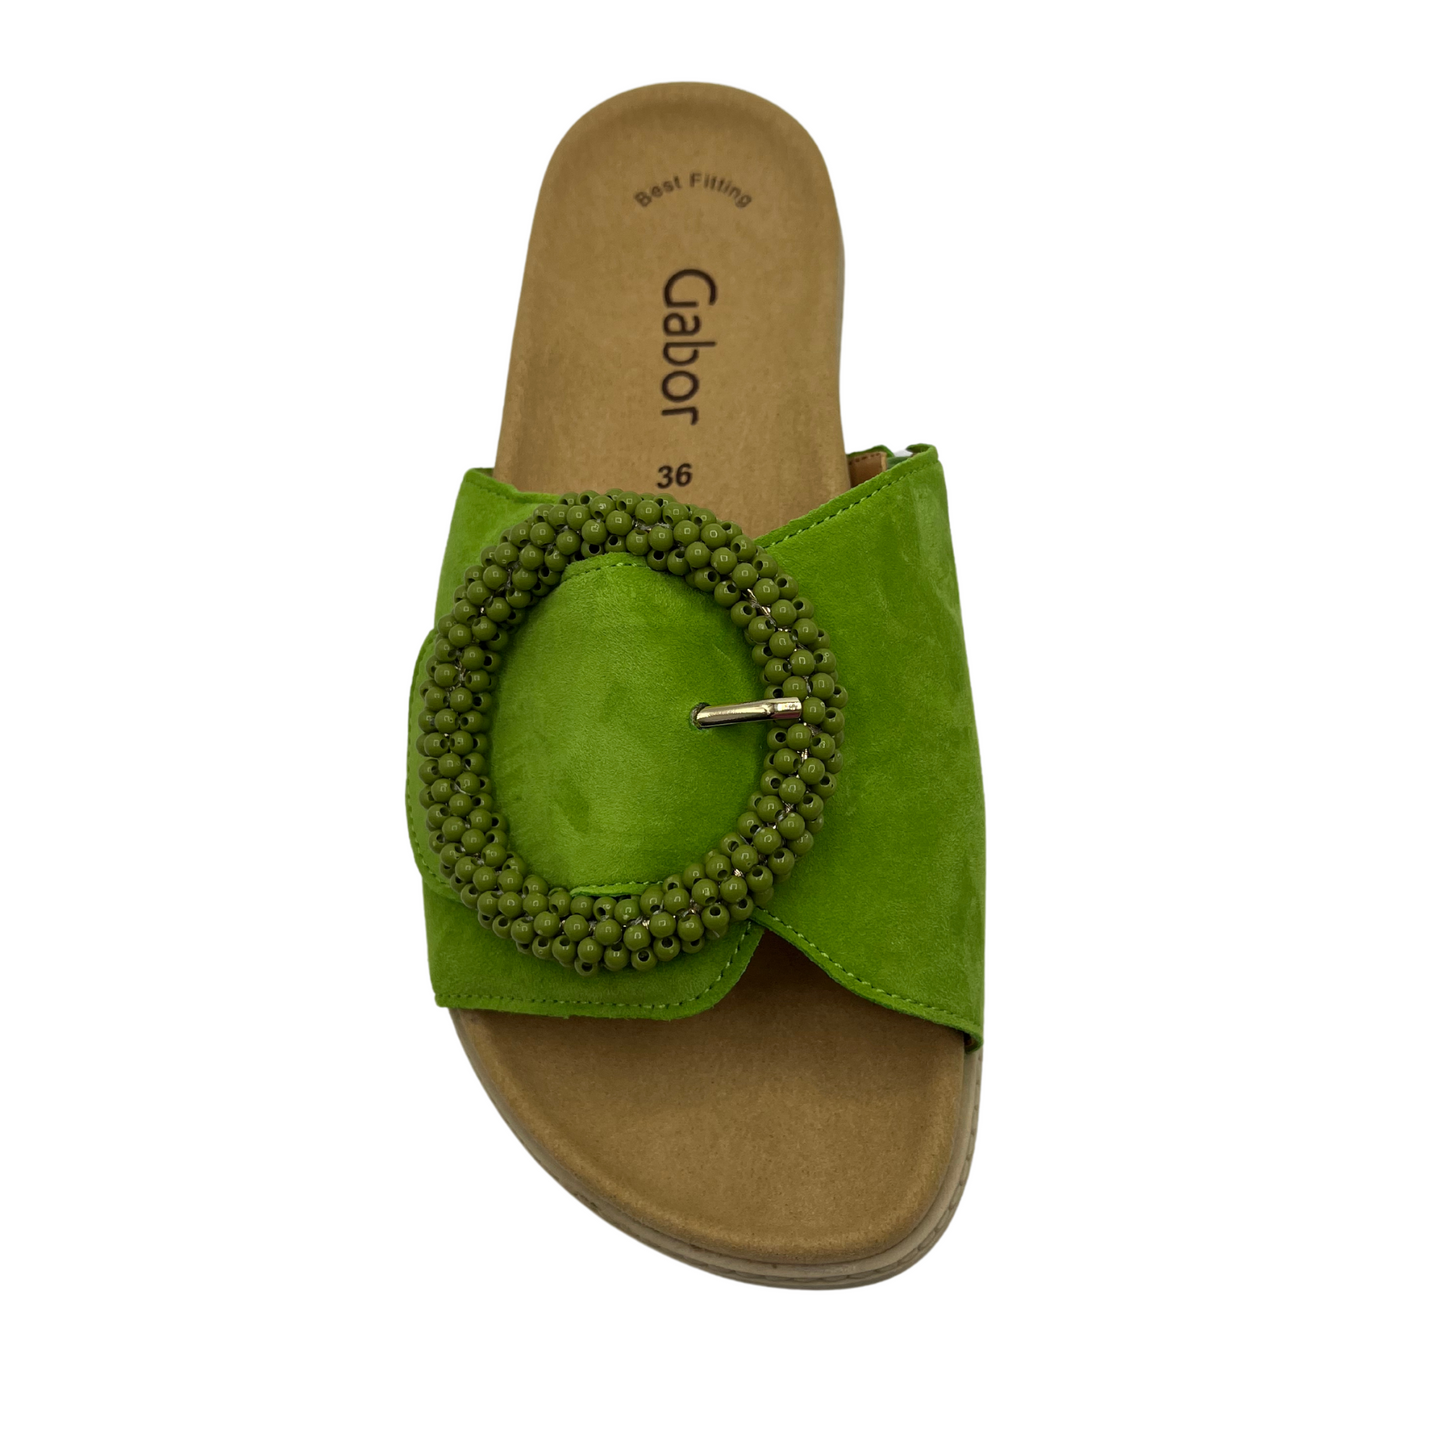 Top view of Lime green suede slide with large buckle detail and anatomical footbed